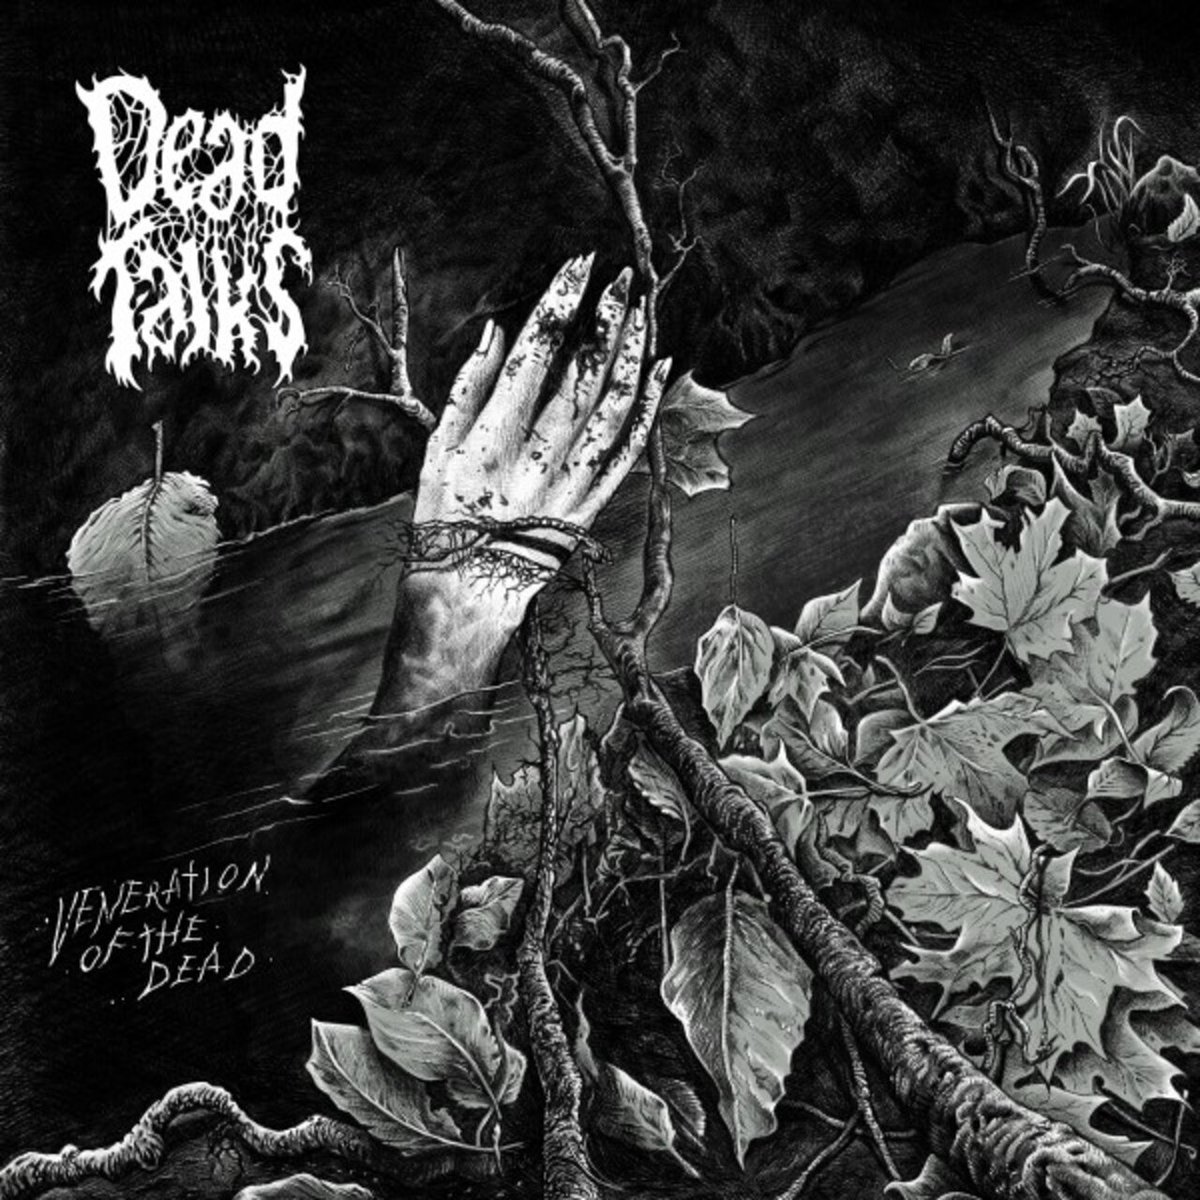 Dead Talks' (featuring Tomi Joutsen, the lead singer of @Amorphis and other things on guitar) first album Veneration of the Dead is damn good. A very old school death metal sound. Dark, very heavy, and never boring.